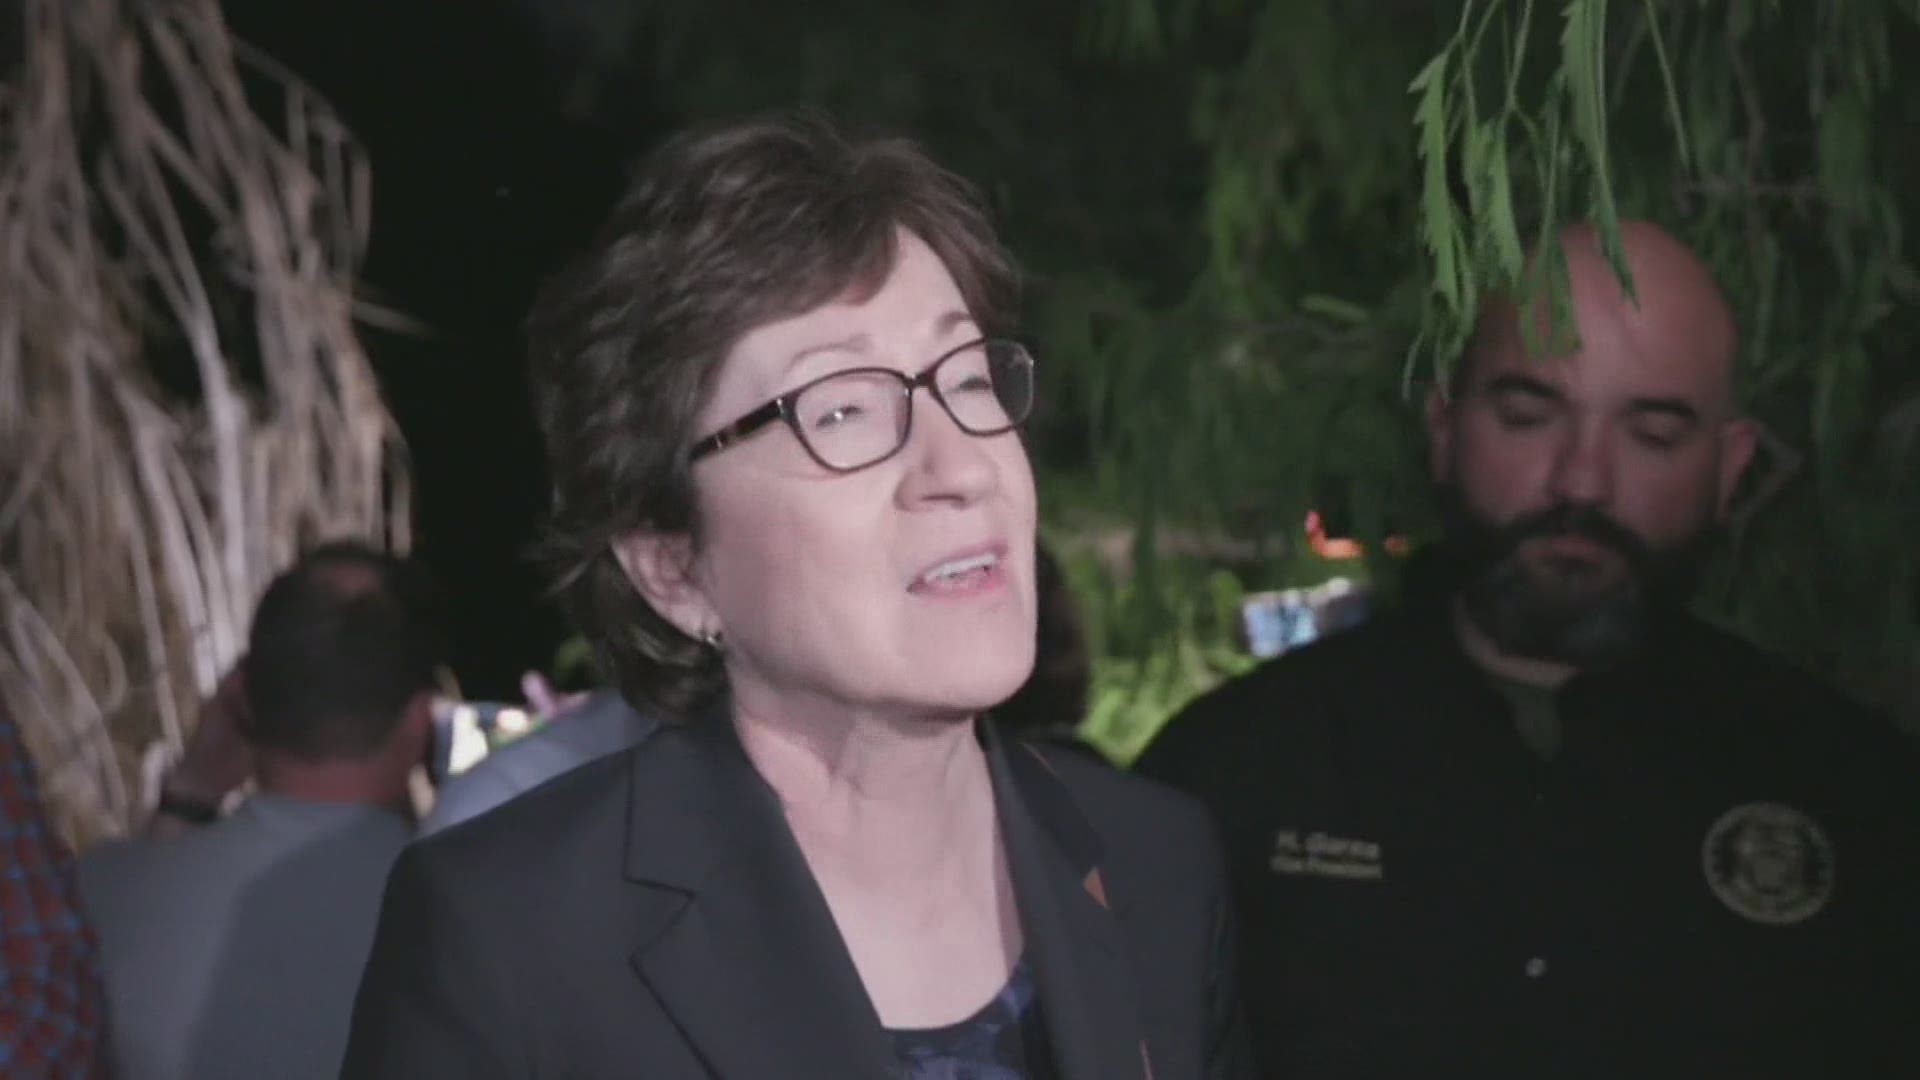 Sen. Susan Collins is on her way back to Maine after a tour of the southern border in Texas.